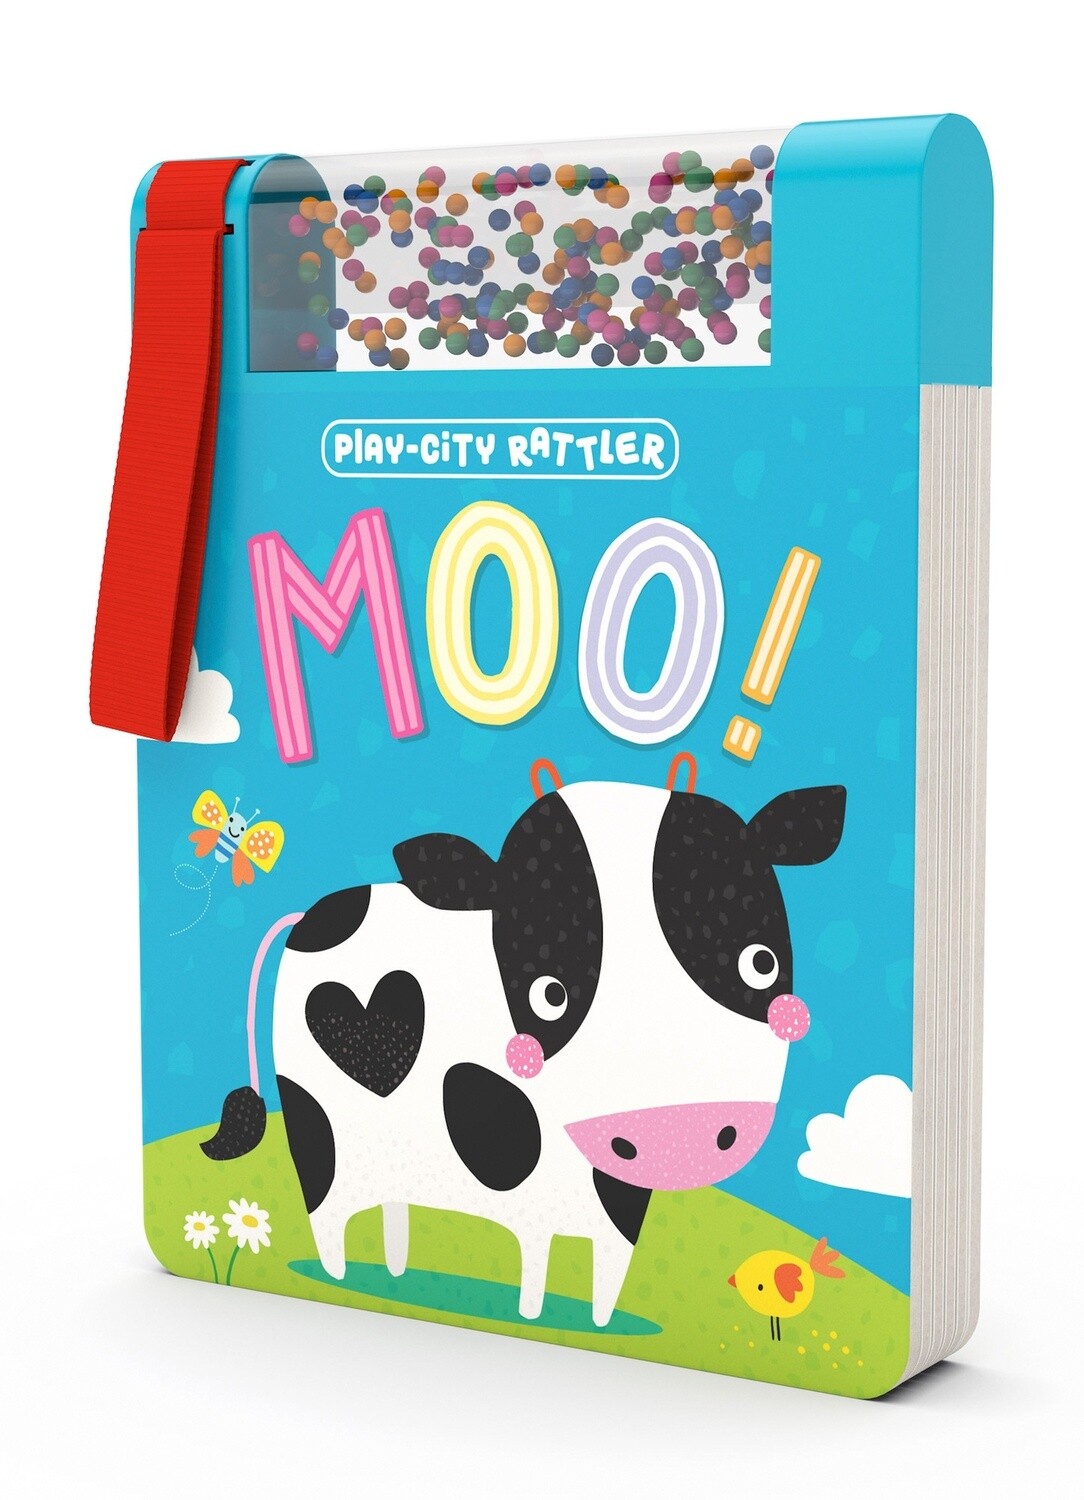 Moo! (Play-City Rattler) by Christie Hainsby